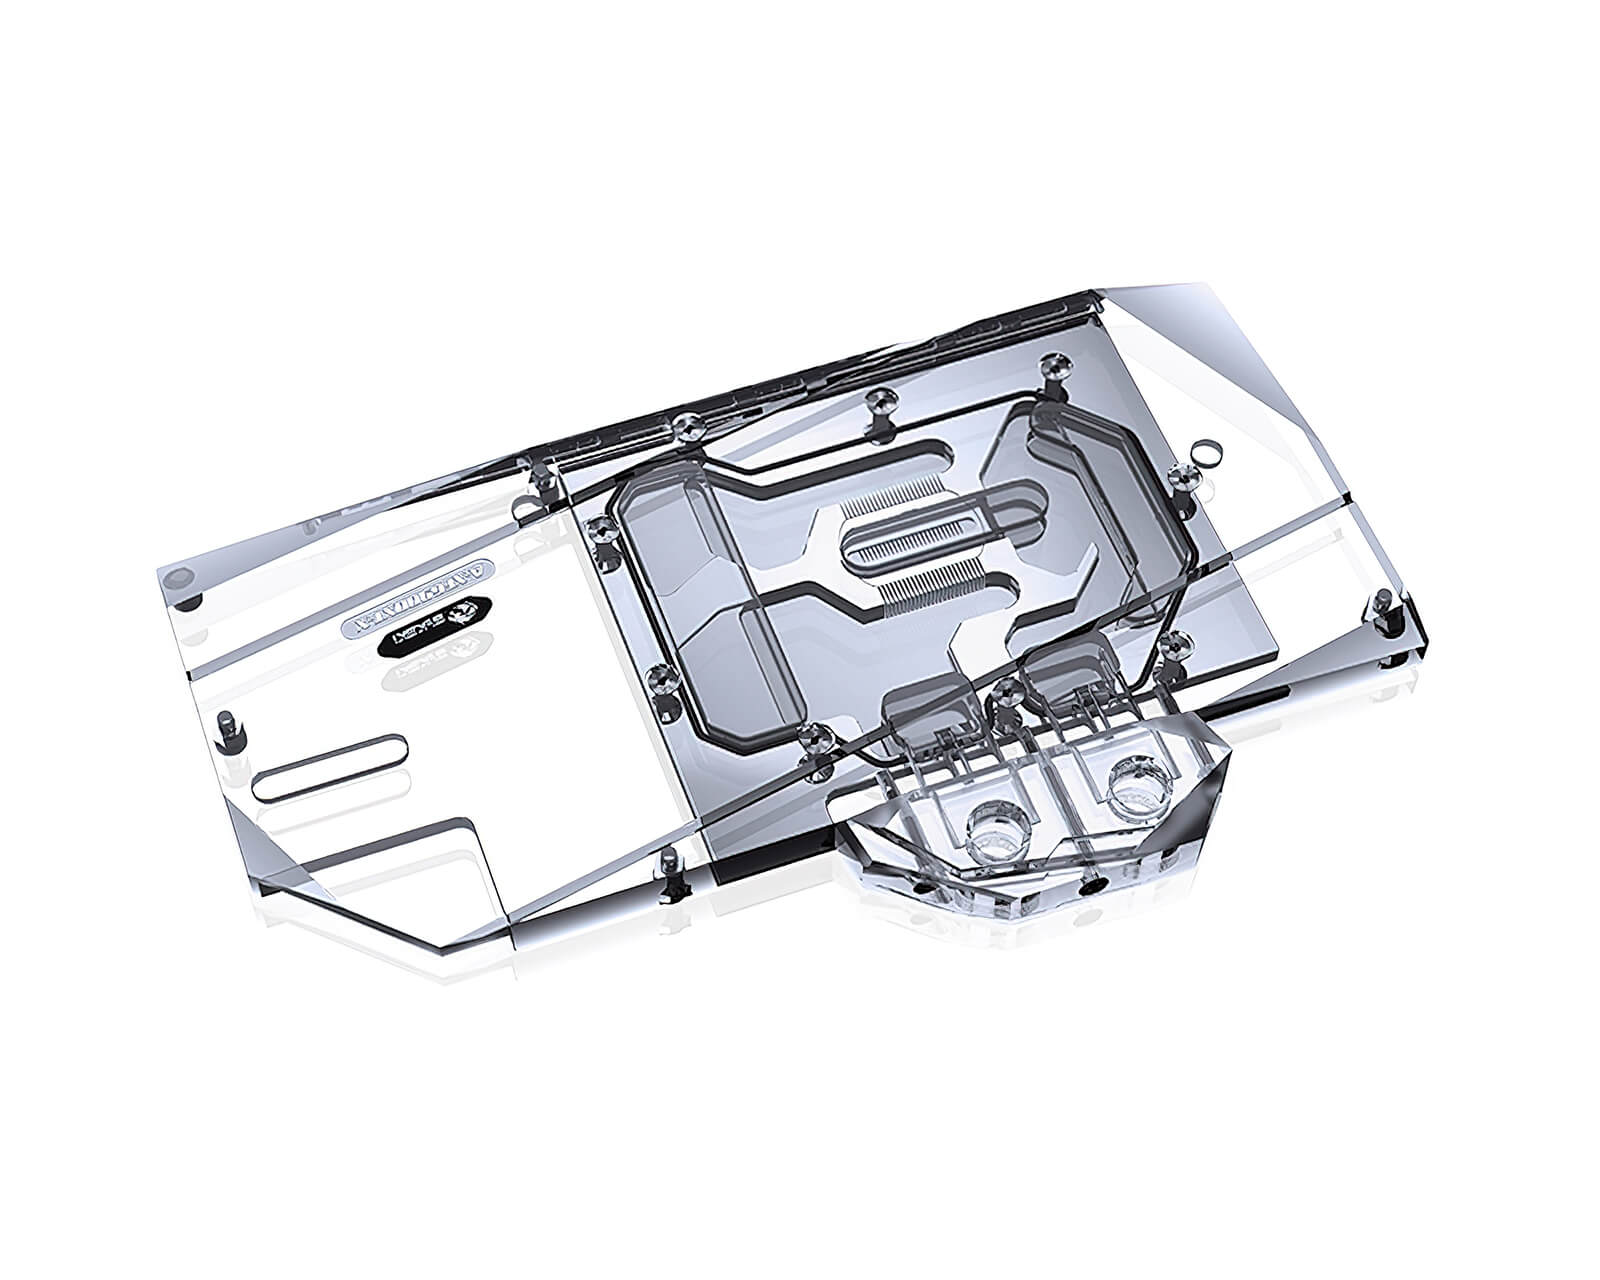 Bykski Full Coverage GPU Water Block and Backplate for XFX RX 6800/6900 XT Overseas Edition (A-XF6900XT-X) - PrimoChill - KEEPING IT COOL